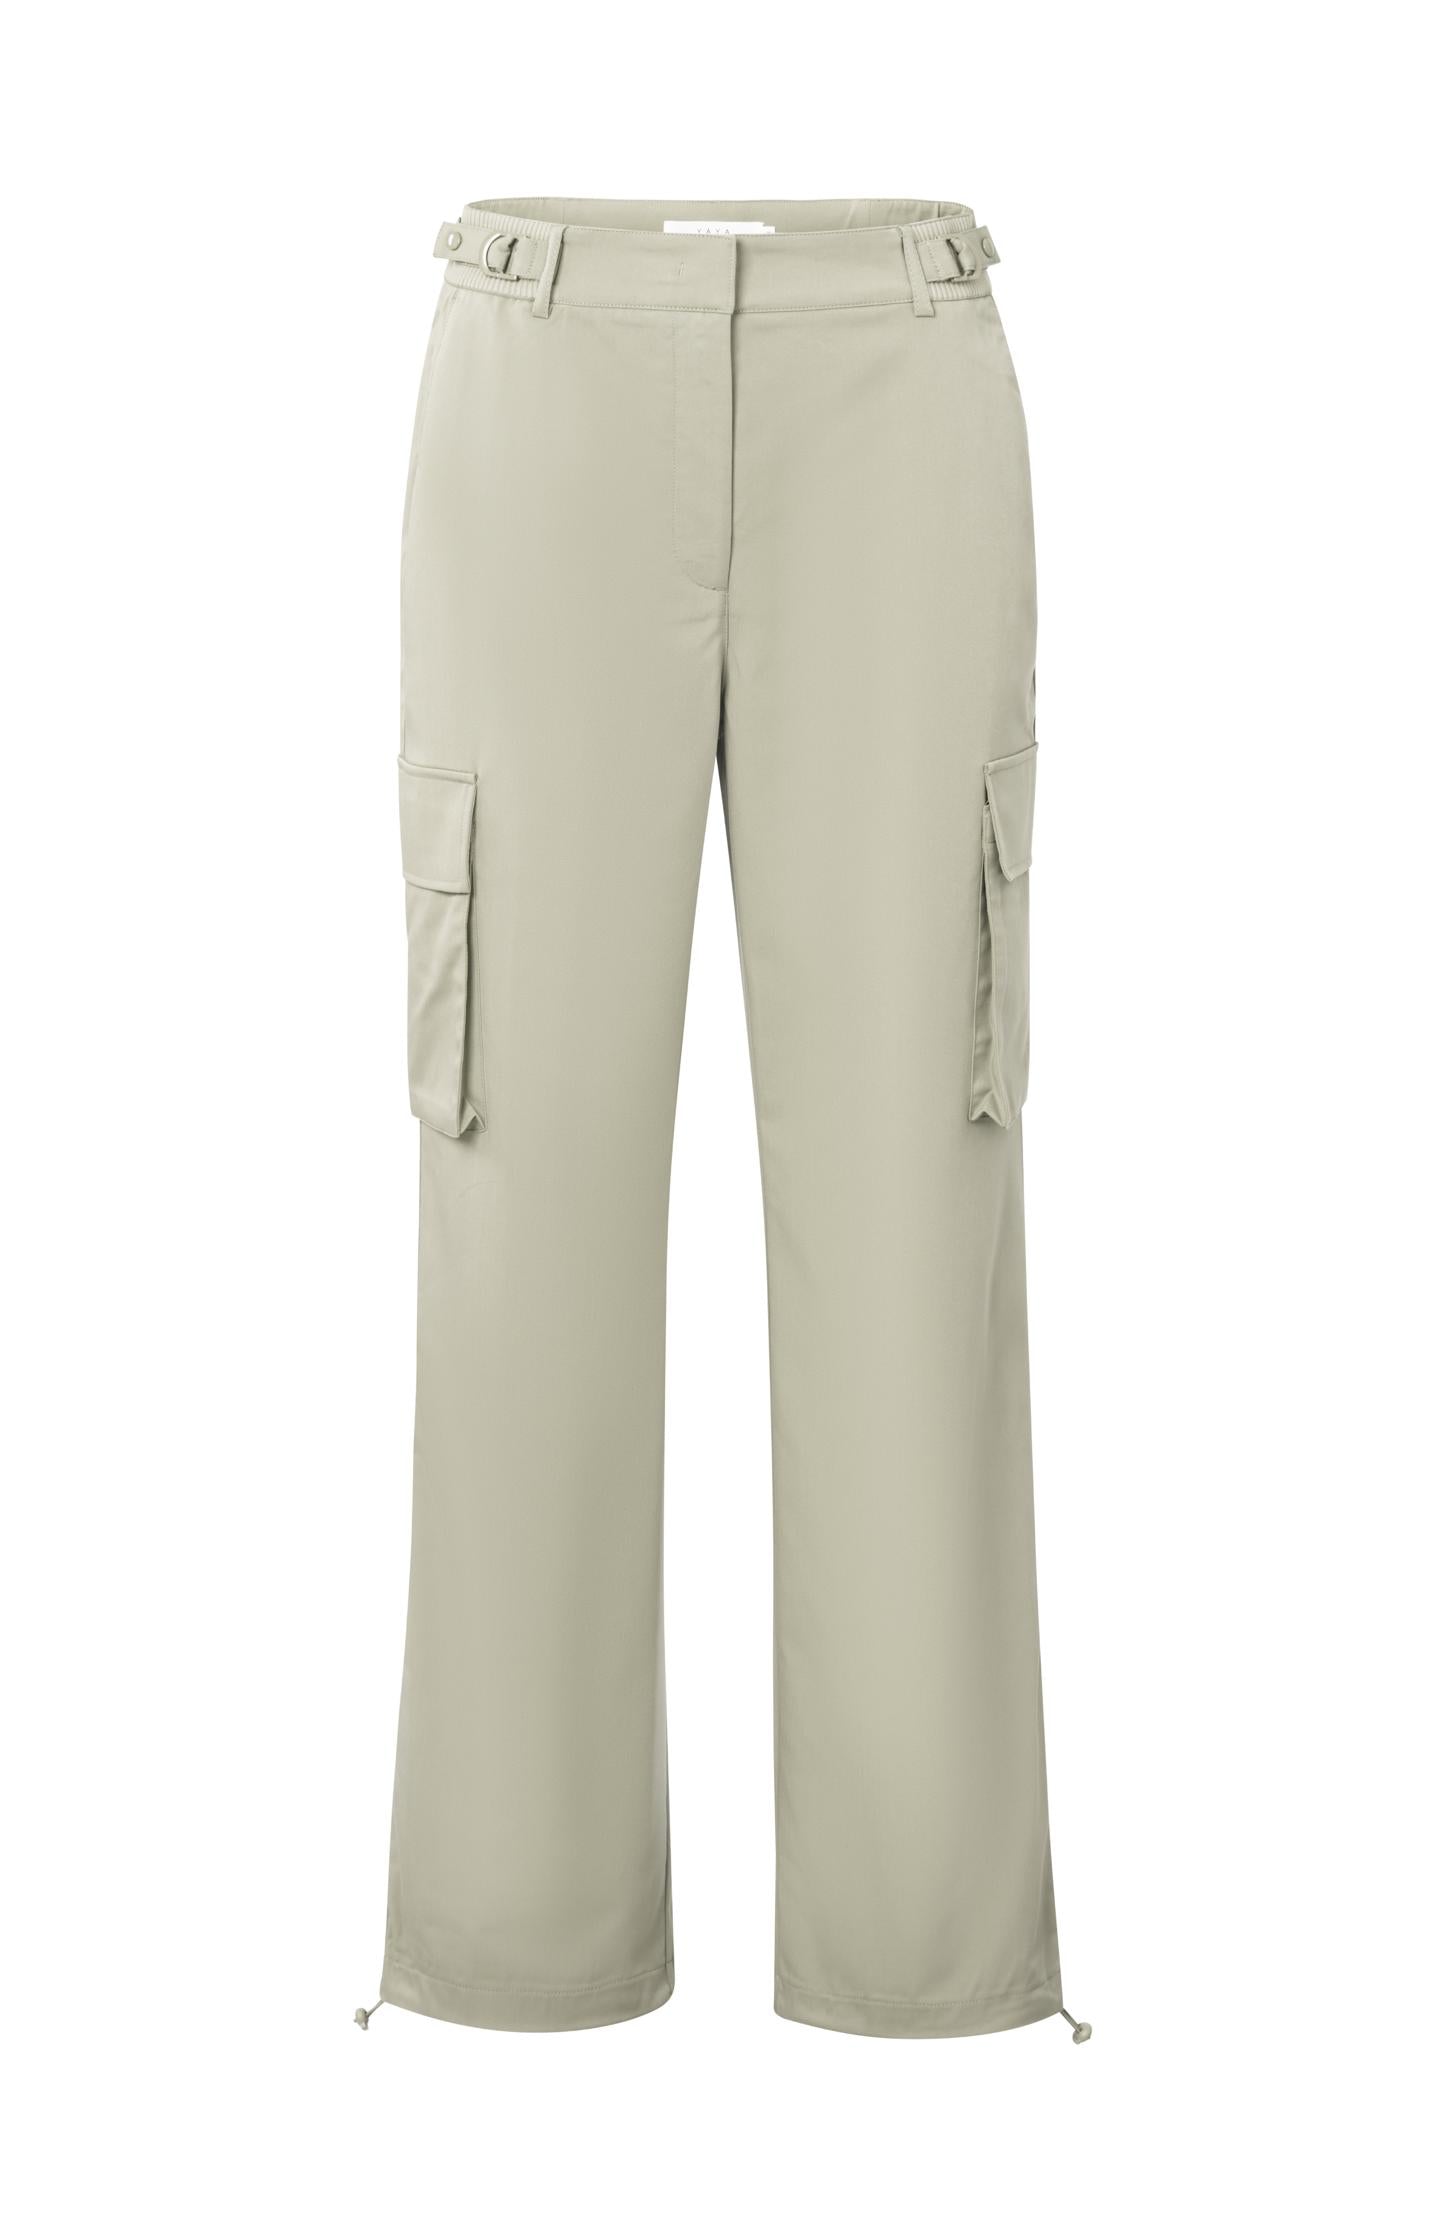 Cargo trousers with wide legs, pockets and waist details - Type: product